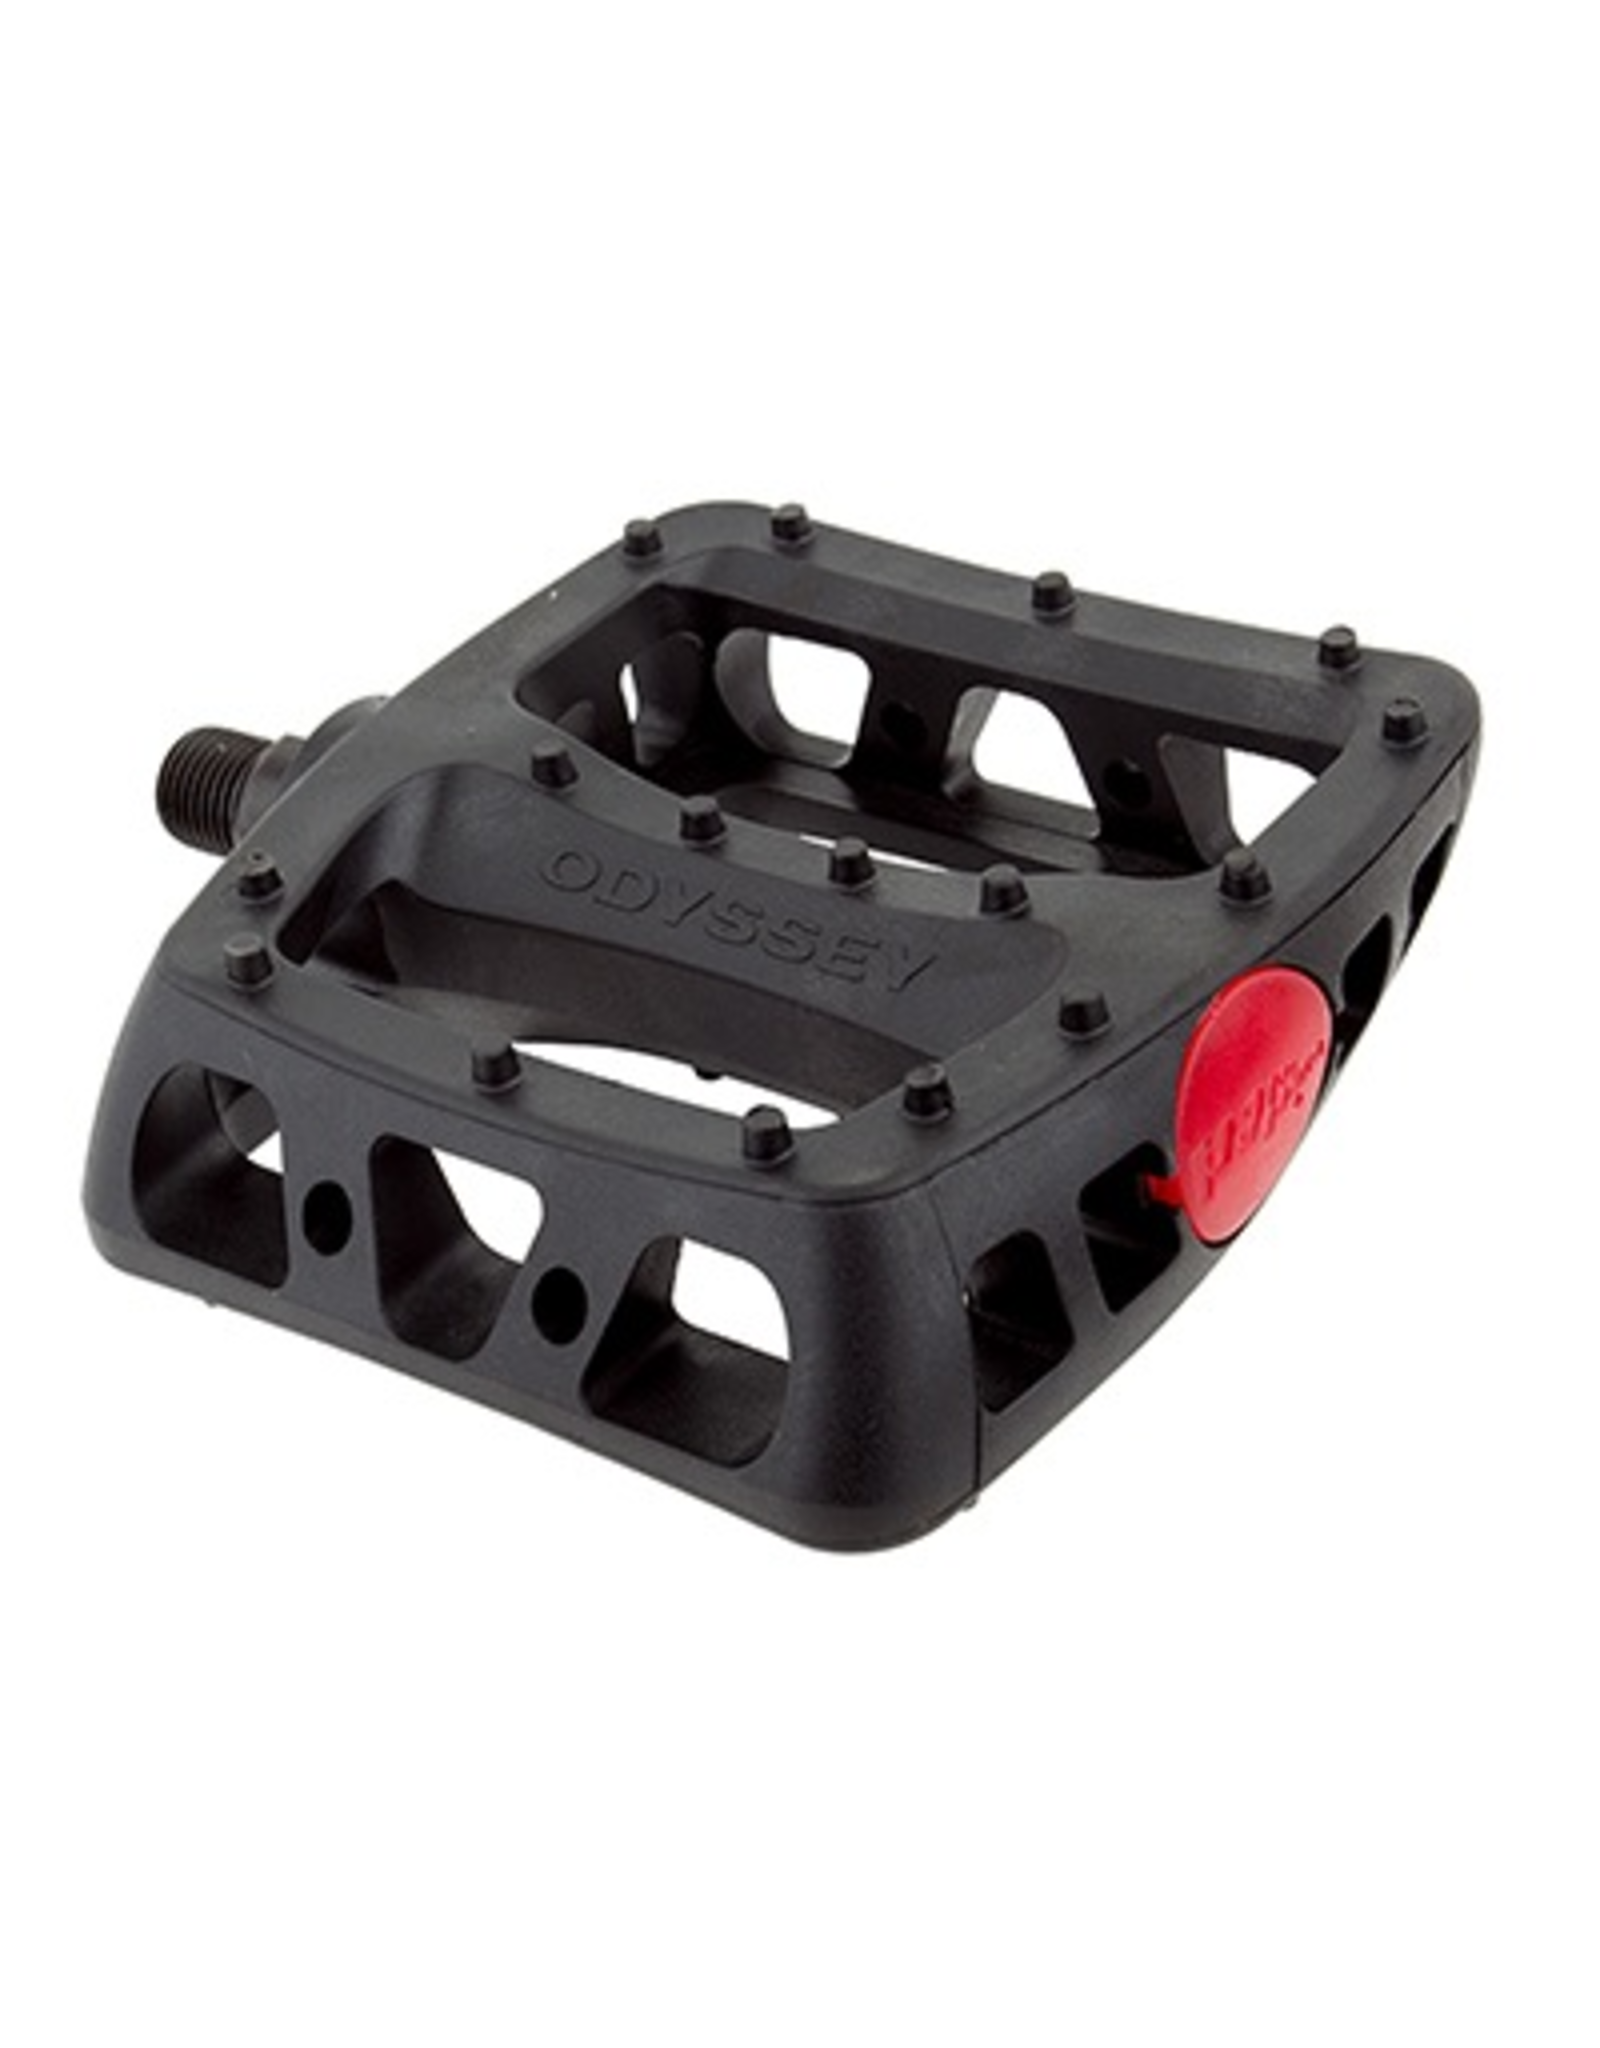 Odyssey Odyssey 1/2" Pedals - Resin, MX Twisted PC